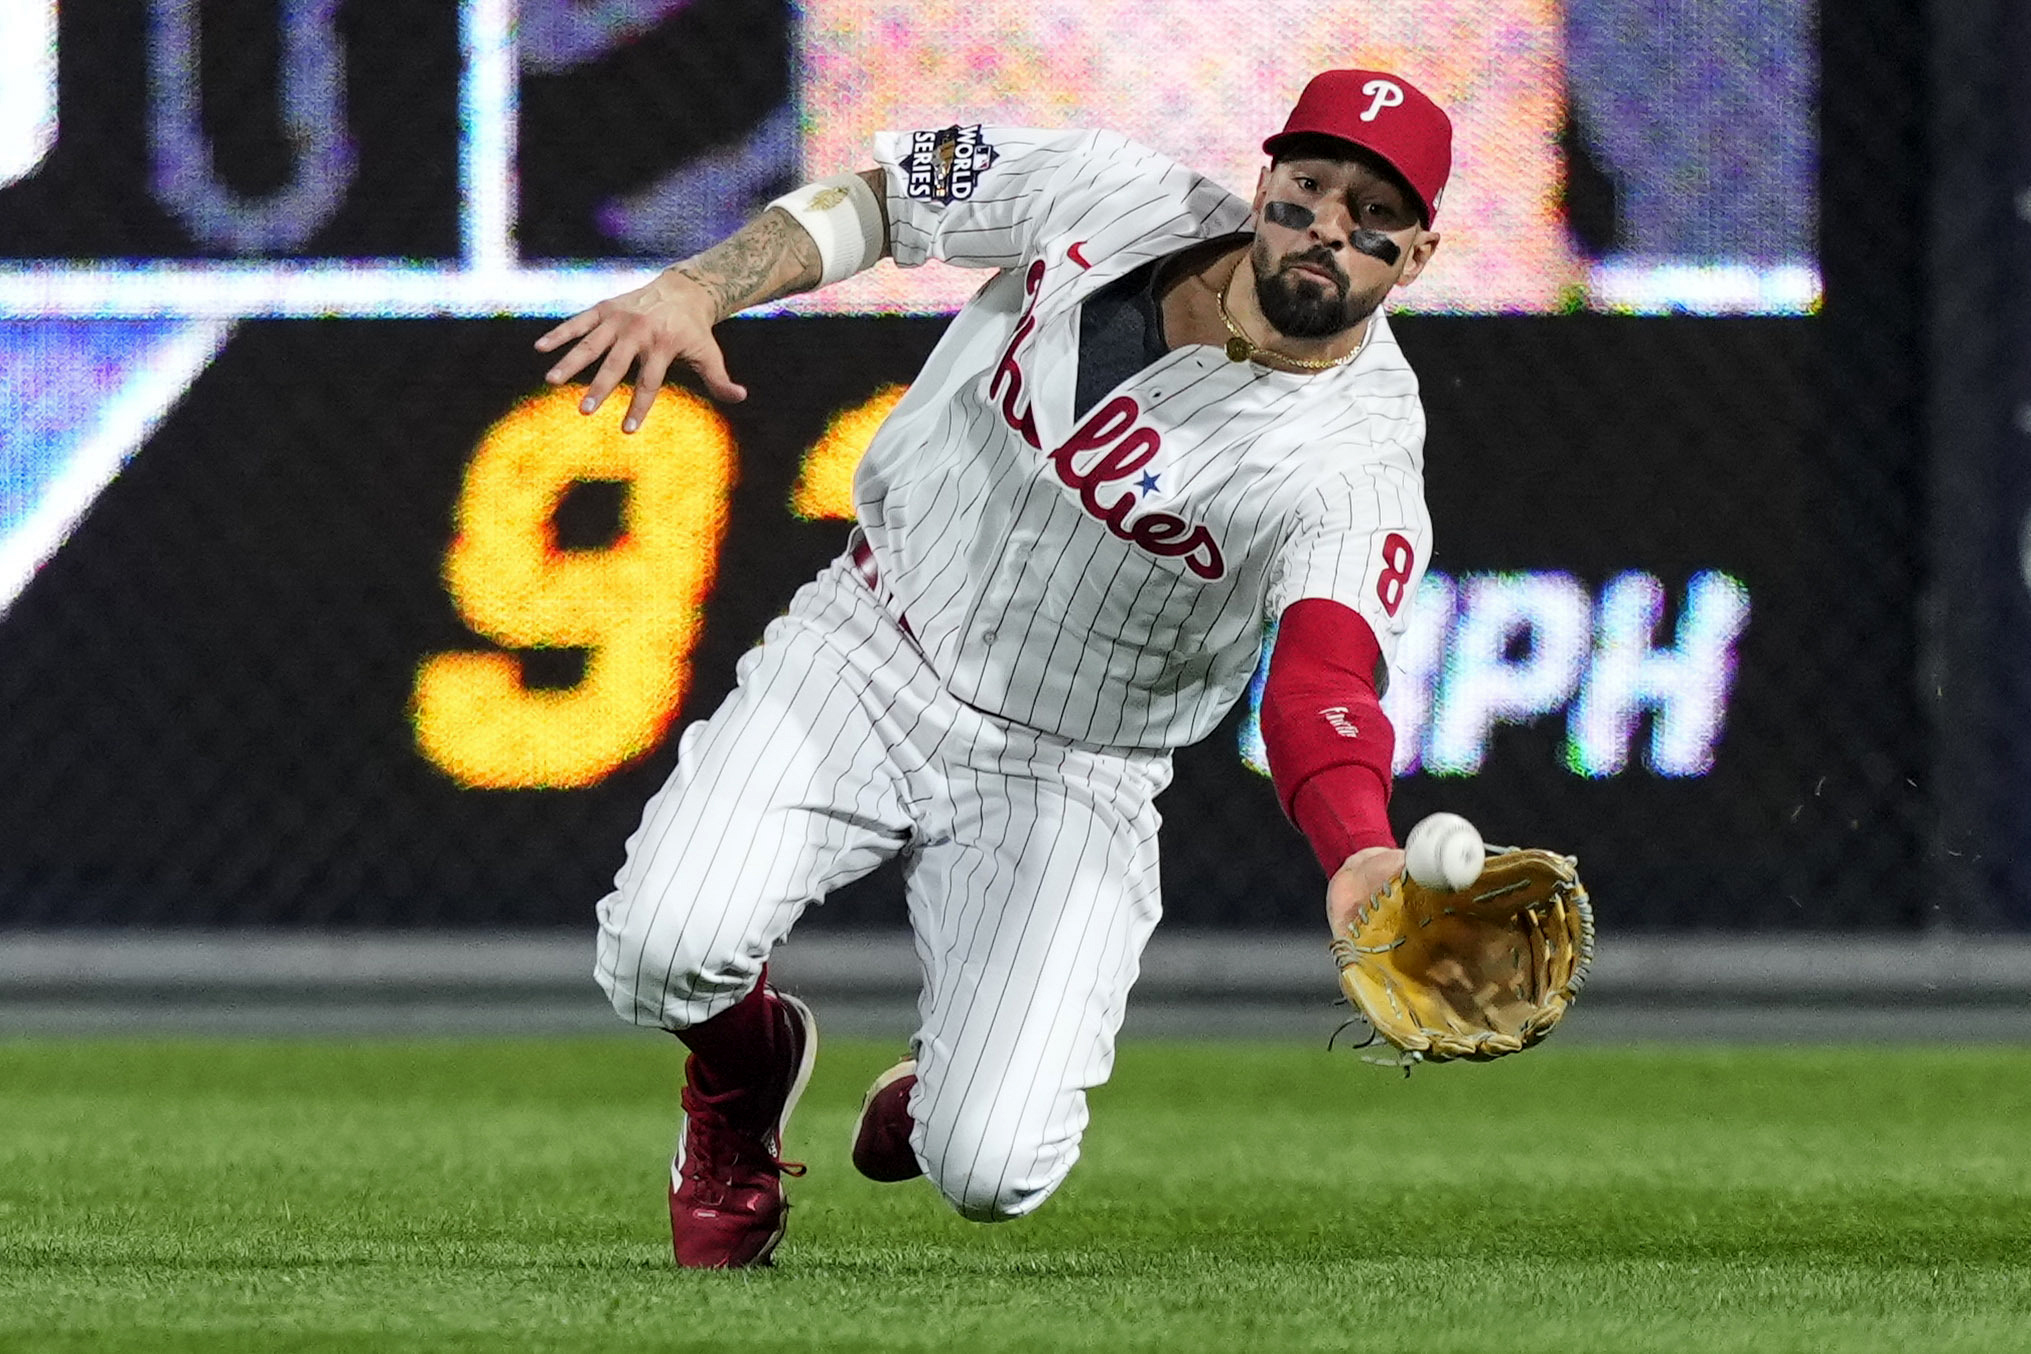 Nick Castellanos has 🧊 in his veins, blasting 2 HRs and pushing the  @phillies to a 2-1 lead against the reigning champs in the NLDS! That …